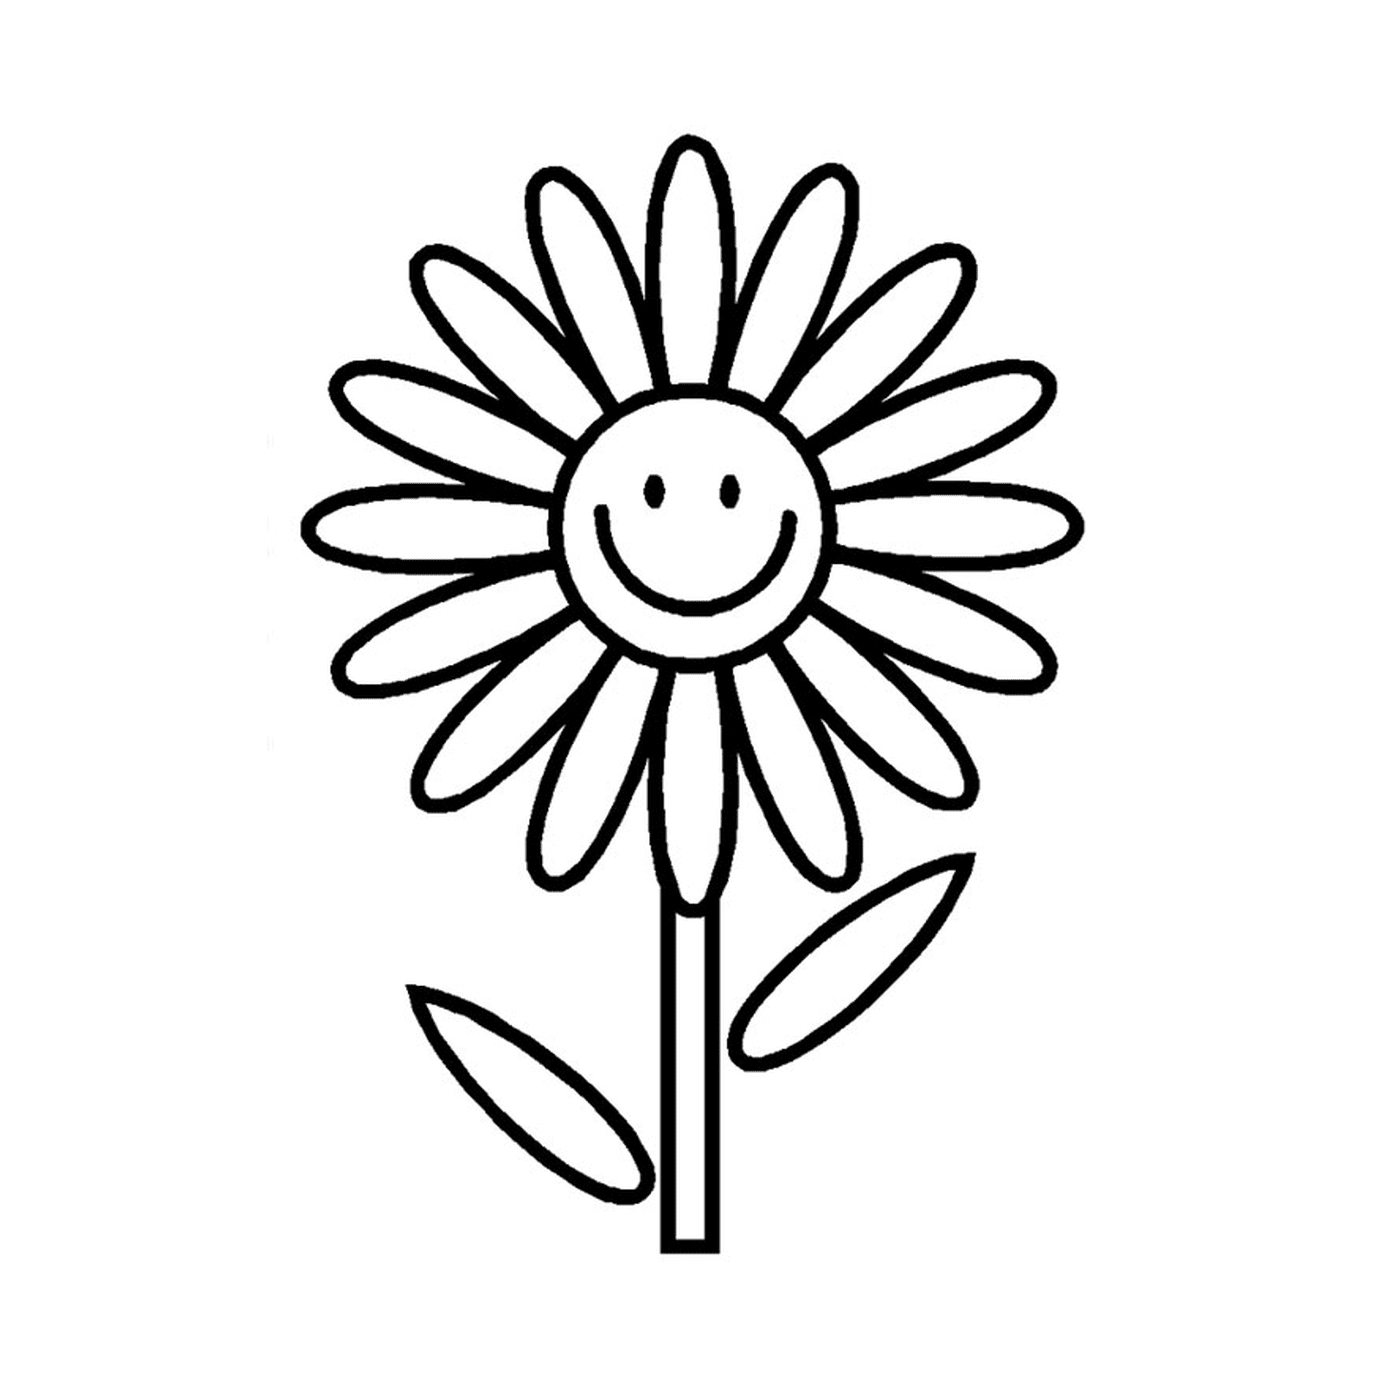  A simple flower with a smiling face 